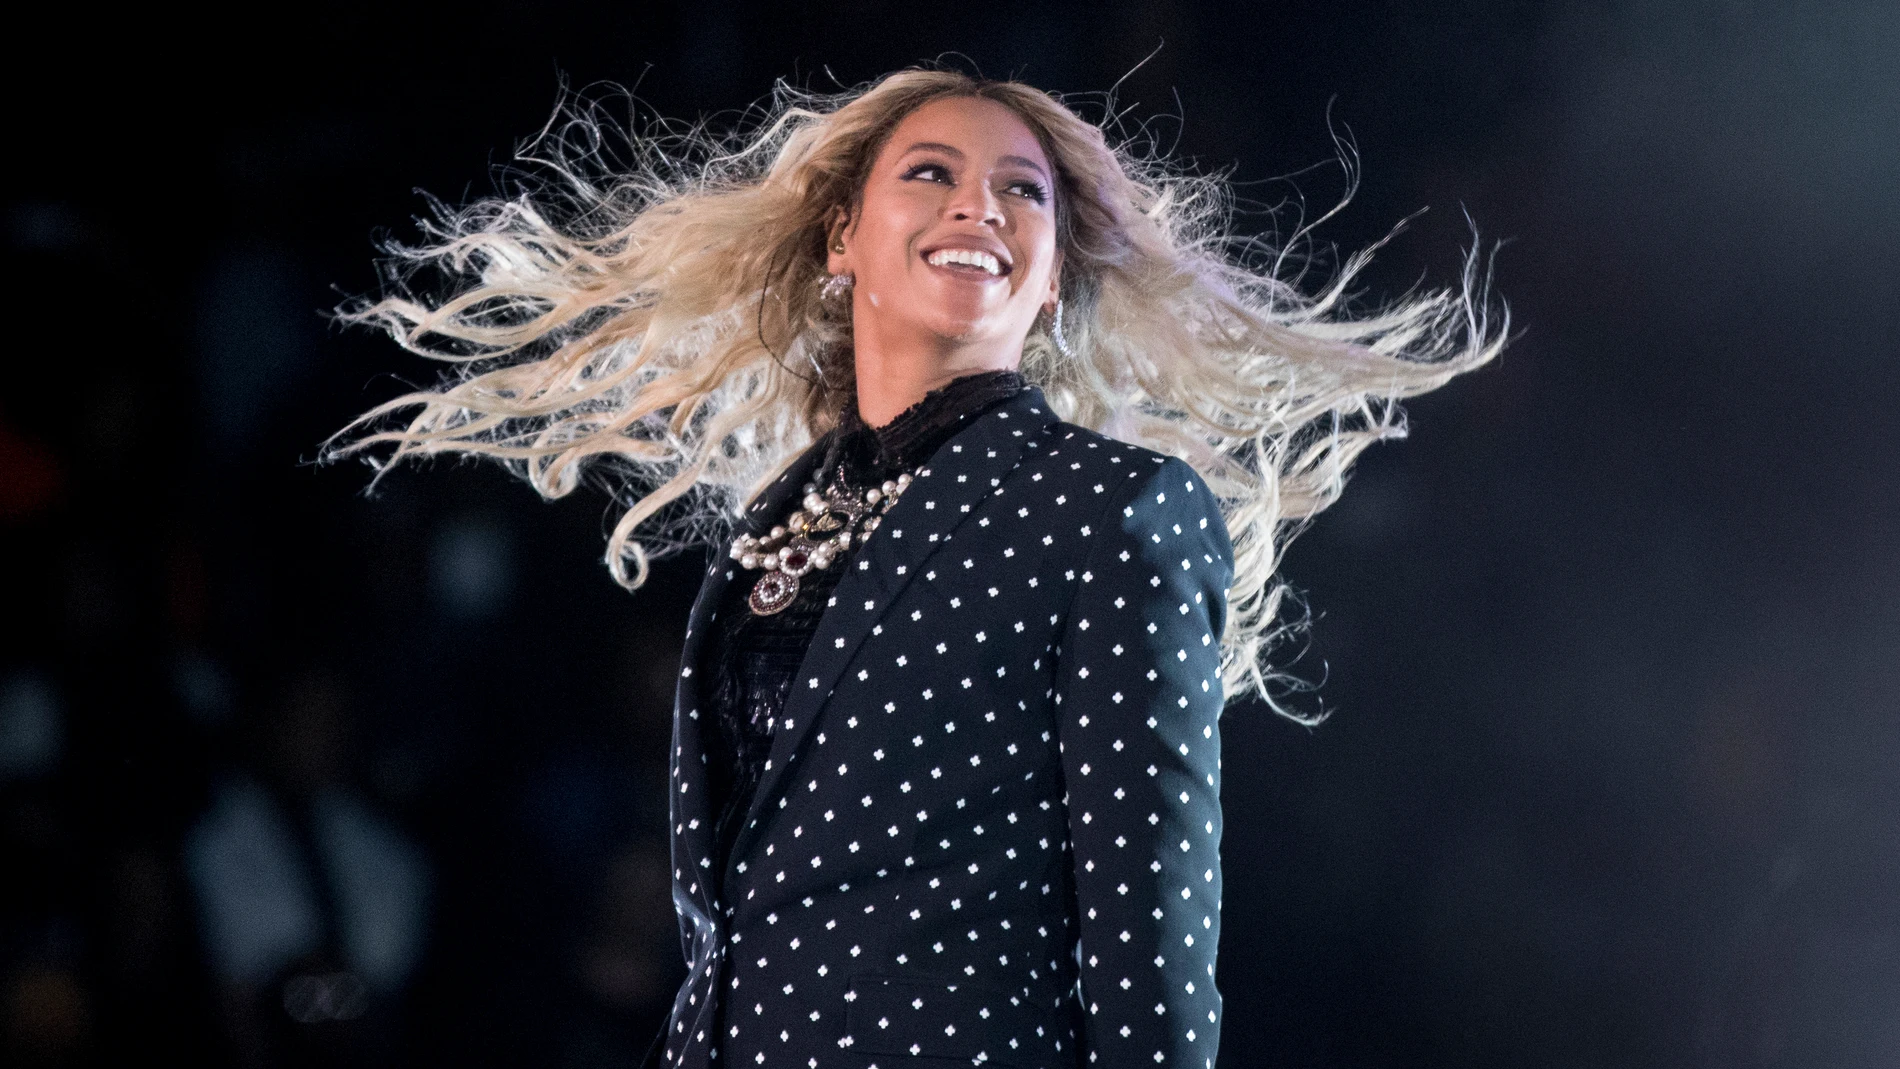 FILE - Beyonce performs at a Get Out the Vote concert for Democratic presidential candidate Hillary Clinton at the Wolstein Center in Cleveland, Ohio, Nov. 4, 2016. Beyonce teased the possibility of new music during a Verizon Super Bowl ad, and then added a cryptic Instagram video that ended with the words "act ii" and a release date of March 29, 2024. (AP Photo/Andrew Harnik, File)